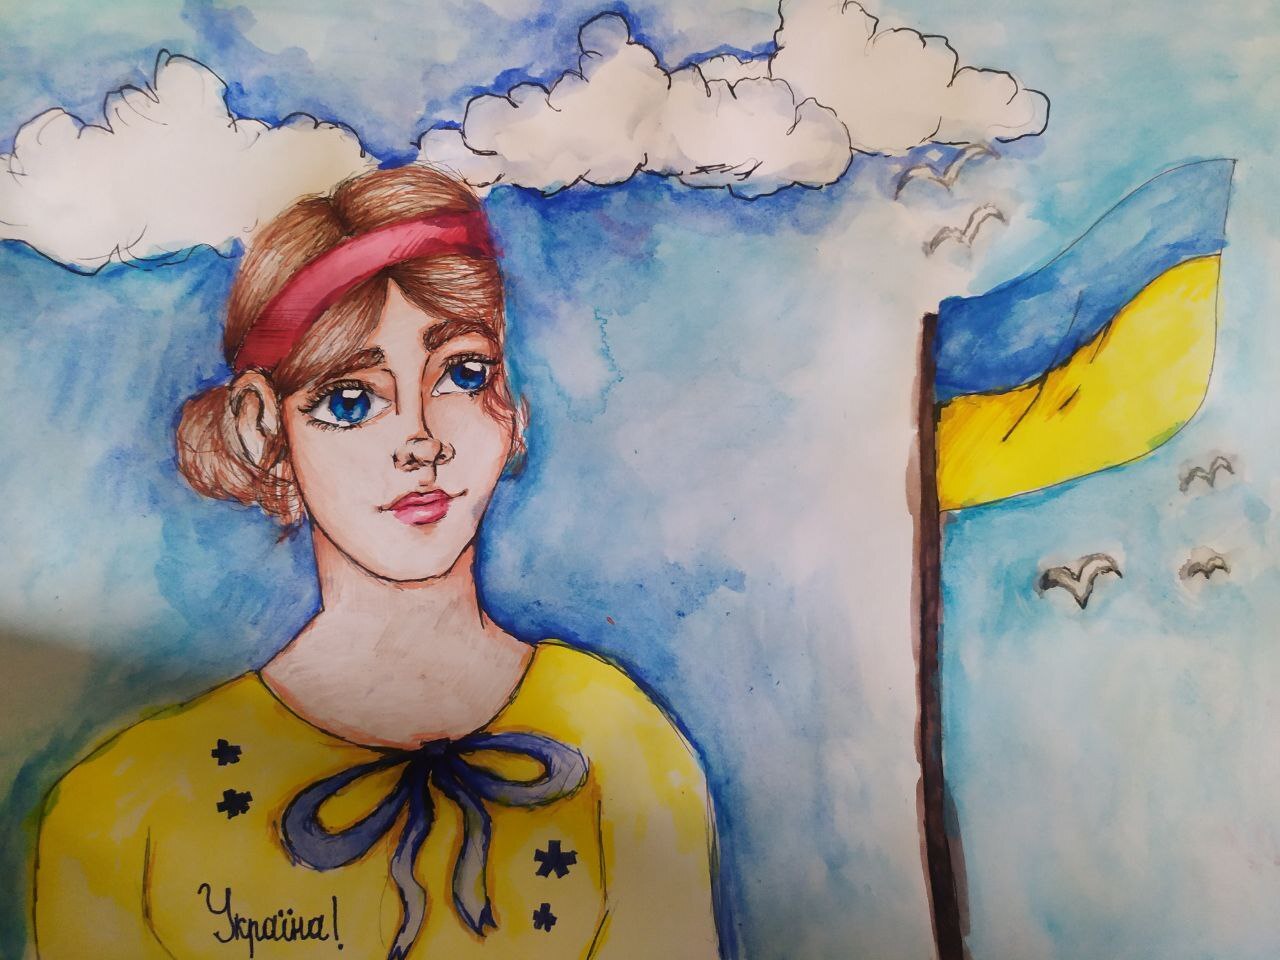 A painting from a child in Ukraine